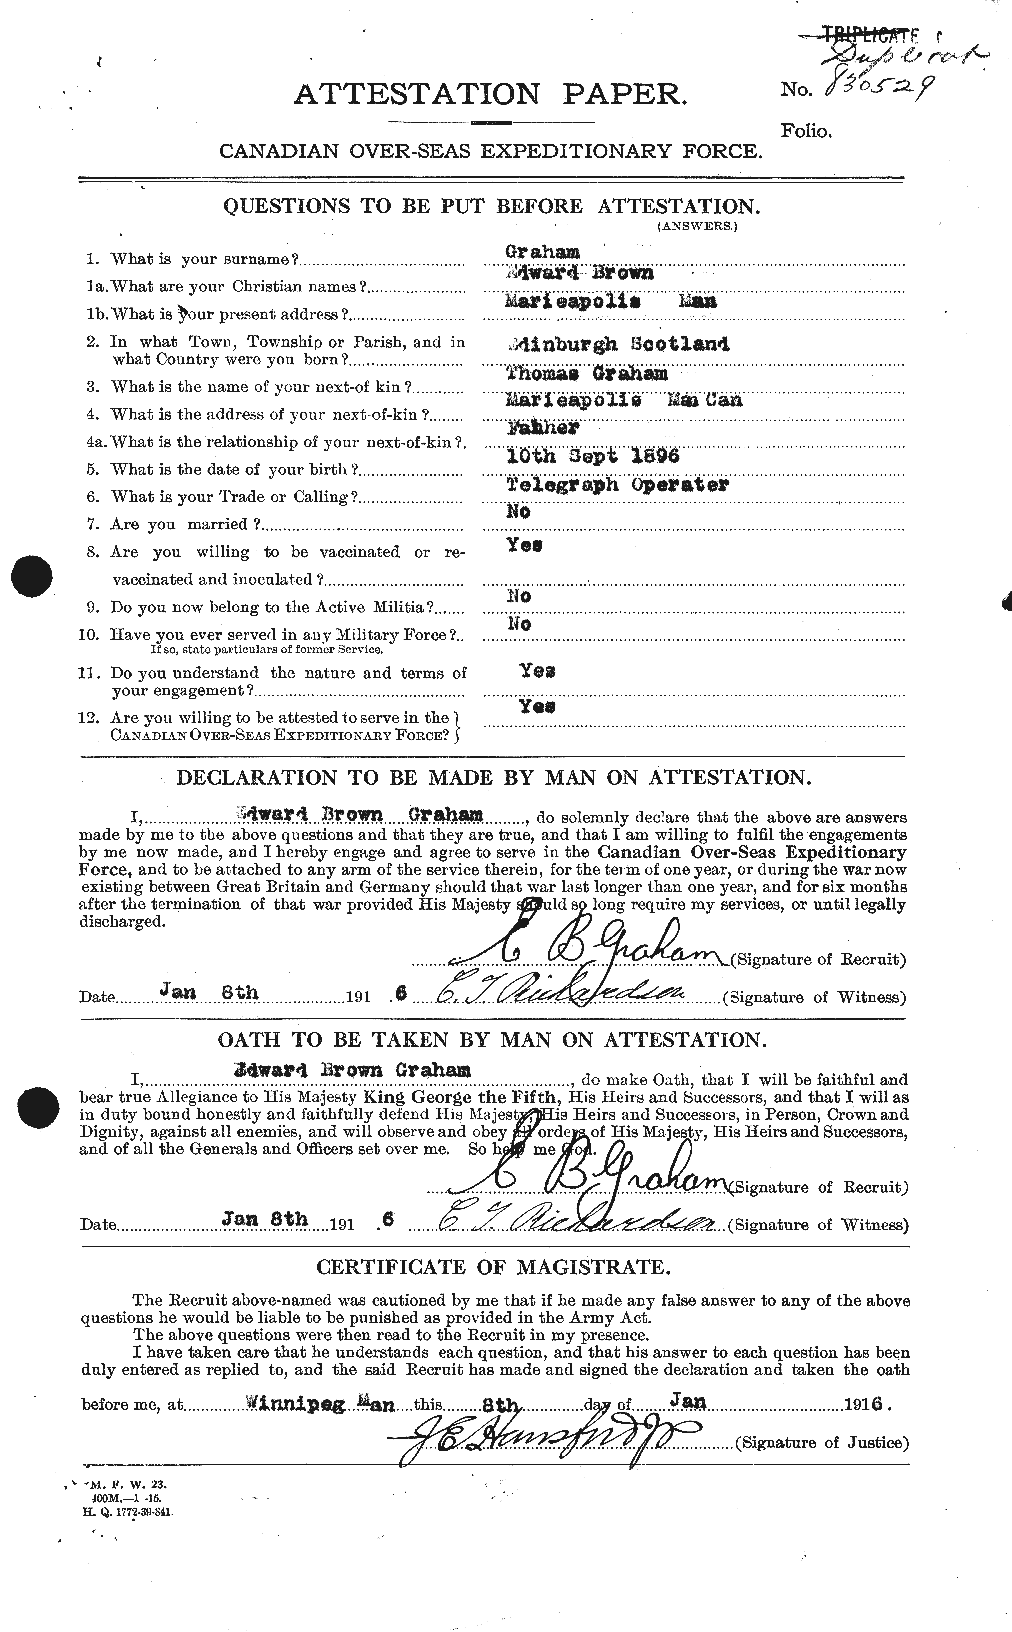 Personnel Records of the First World War - CEF 353867a